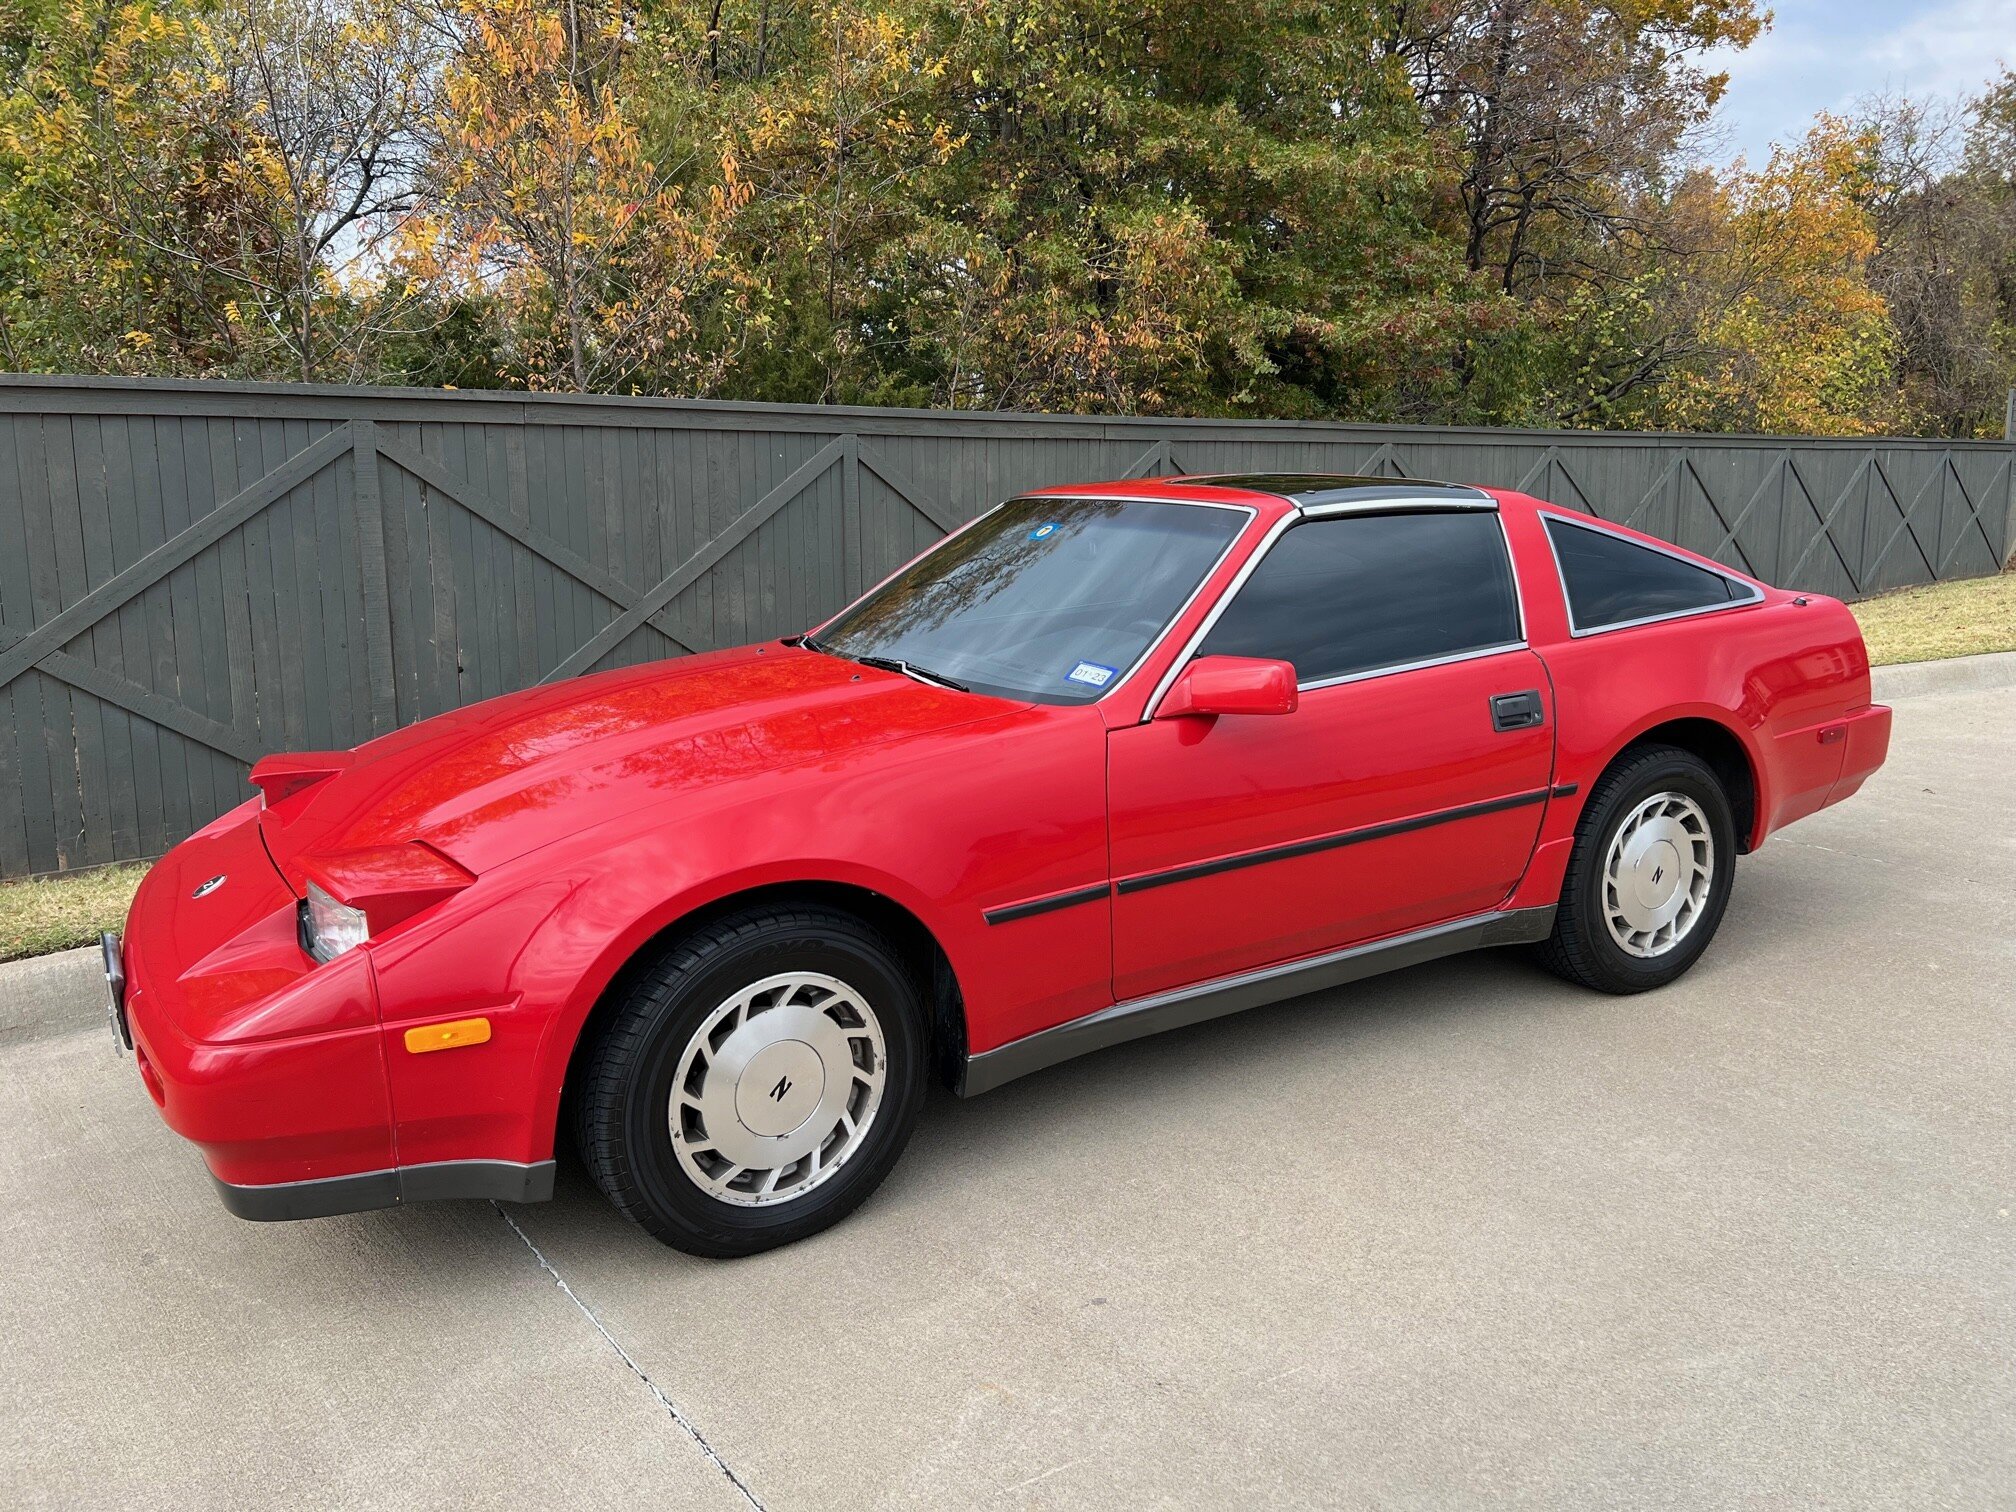 1987 Nissan 300ZX Classic Cars for Sale - Classics on Autotrader